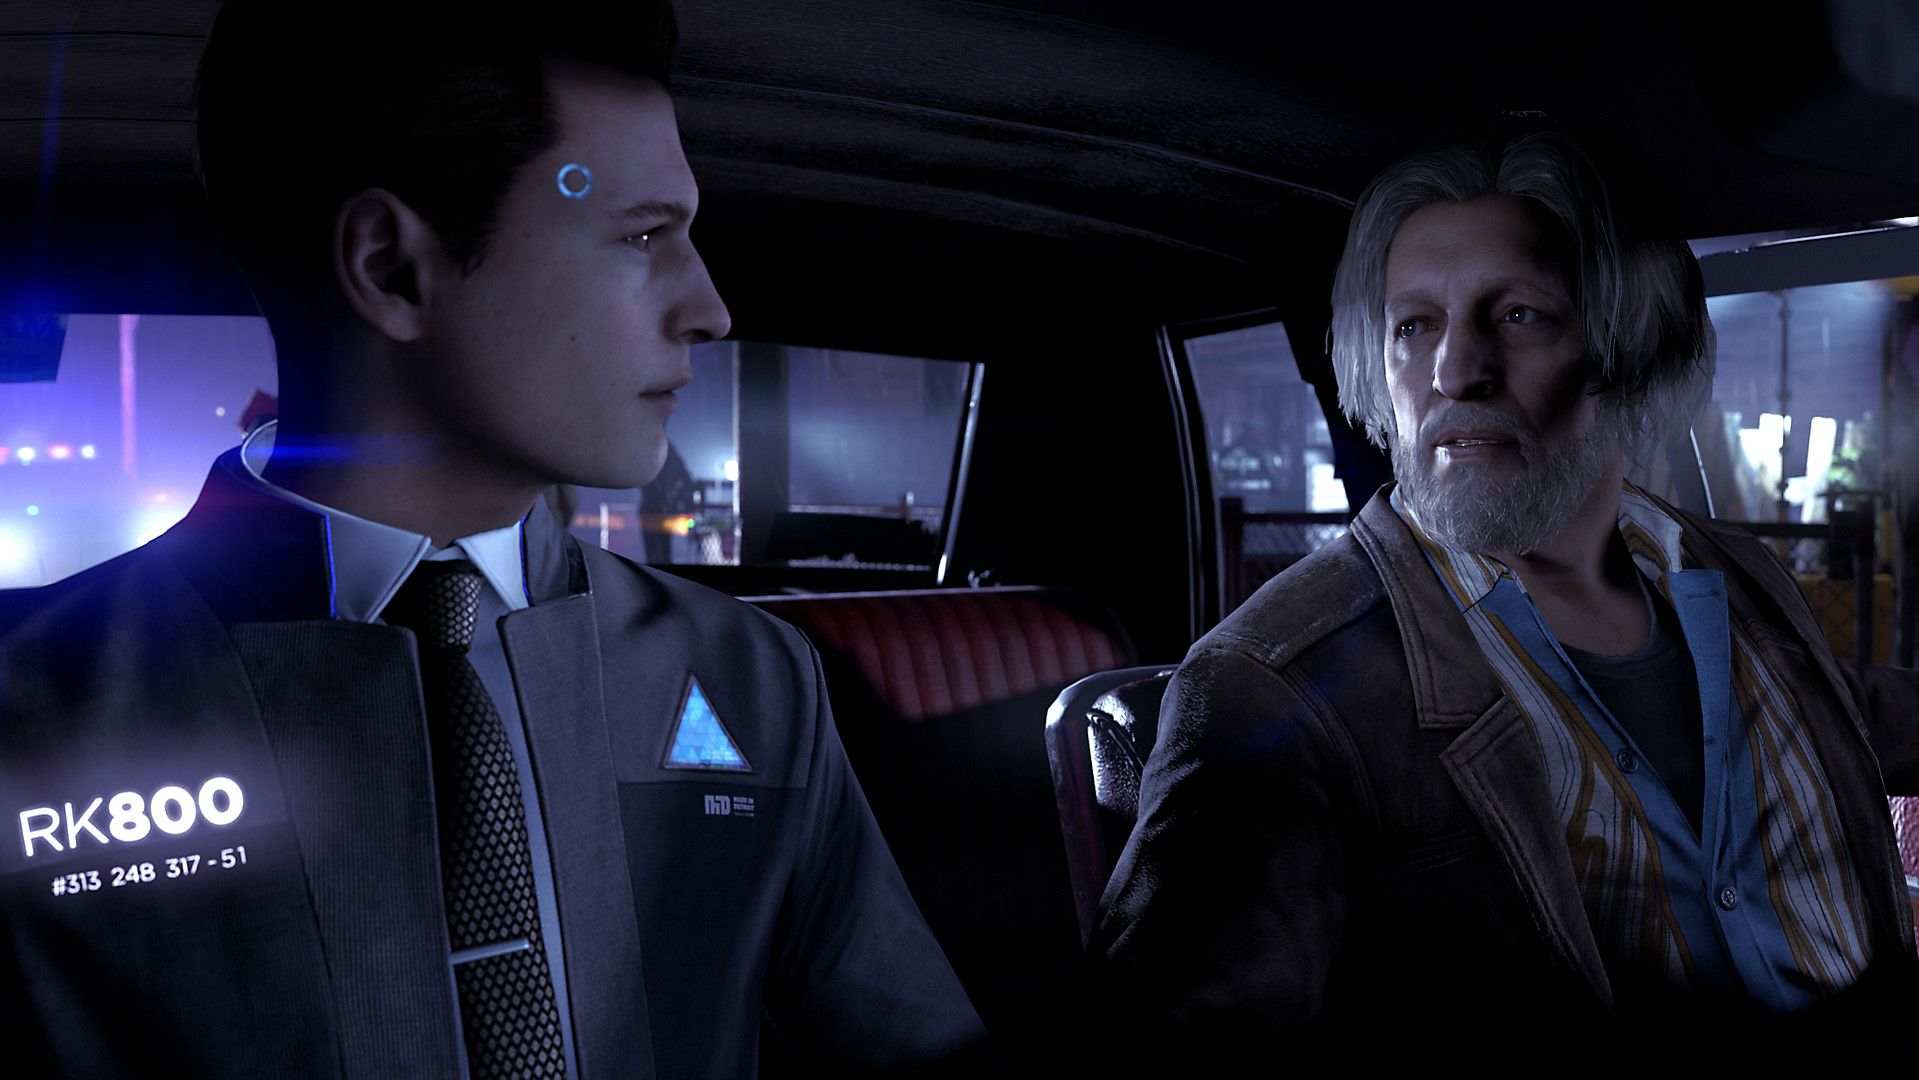 Detroit Become Human Review Interactive Drama (Almost) Tackles Difficult Ideas